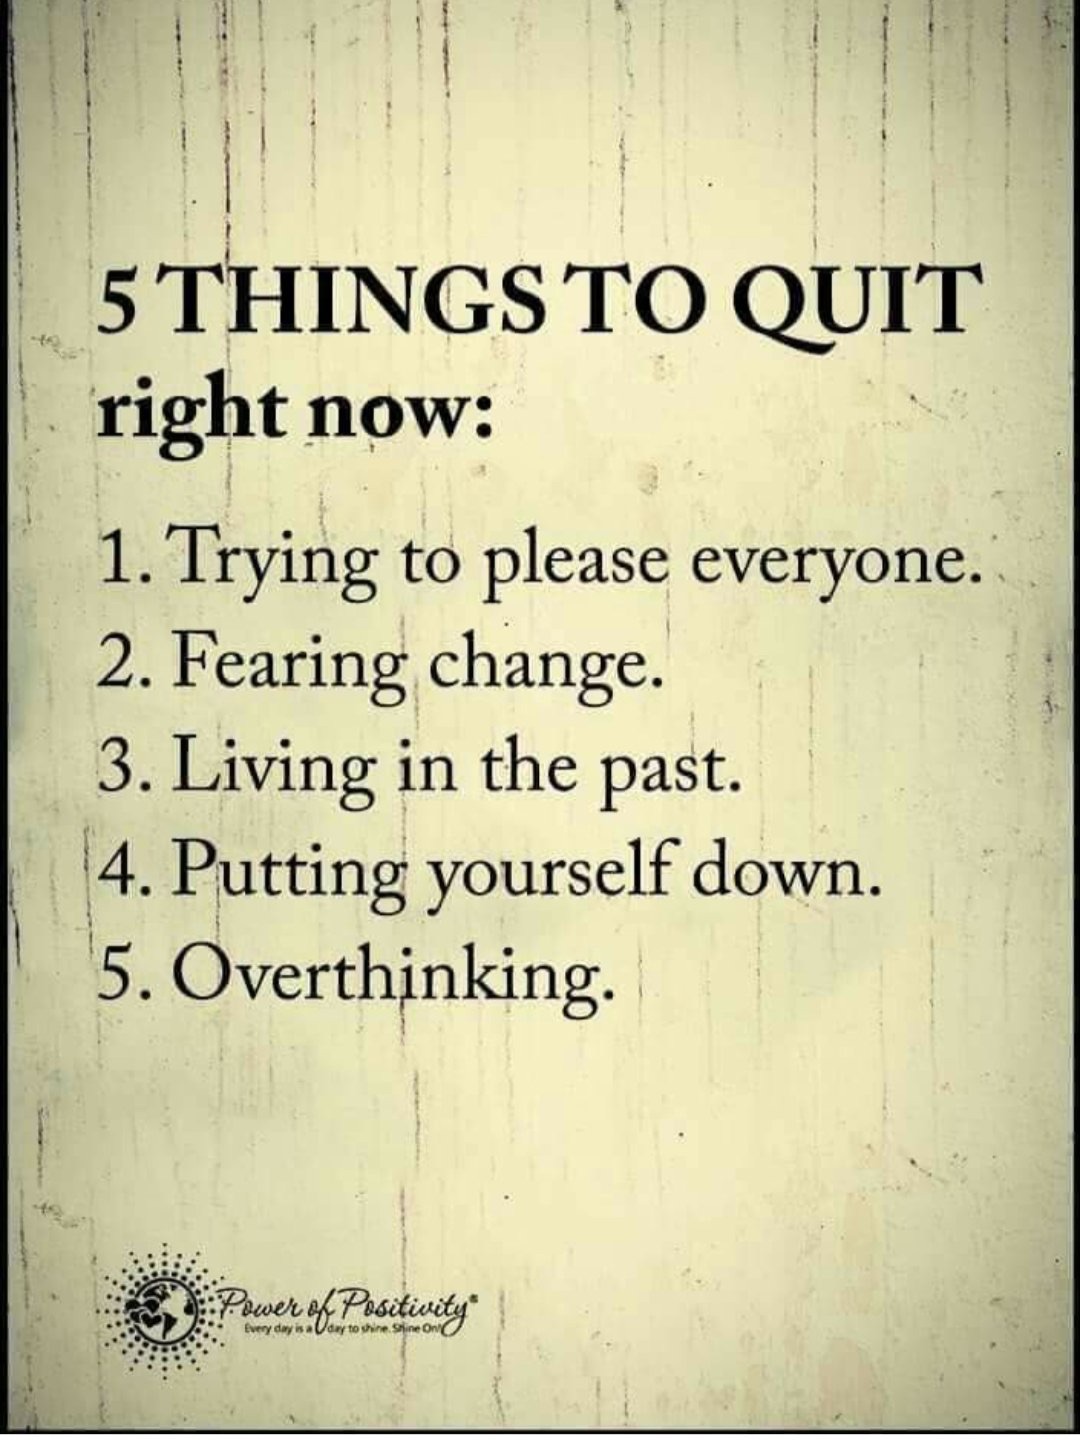 Things to quit